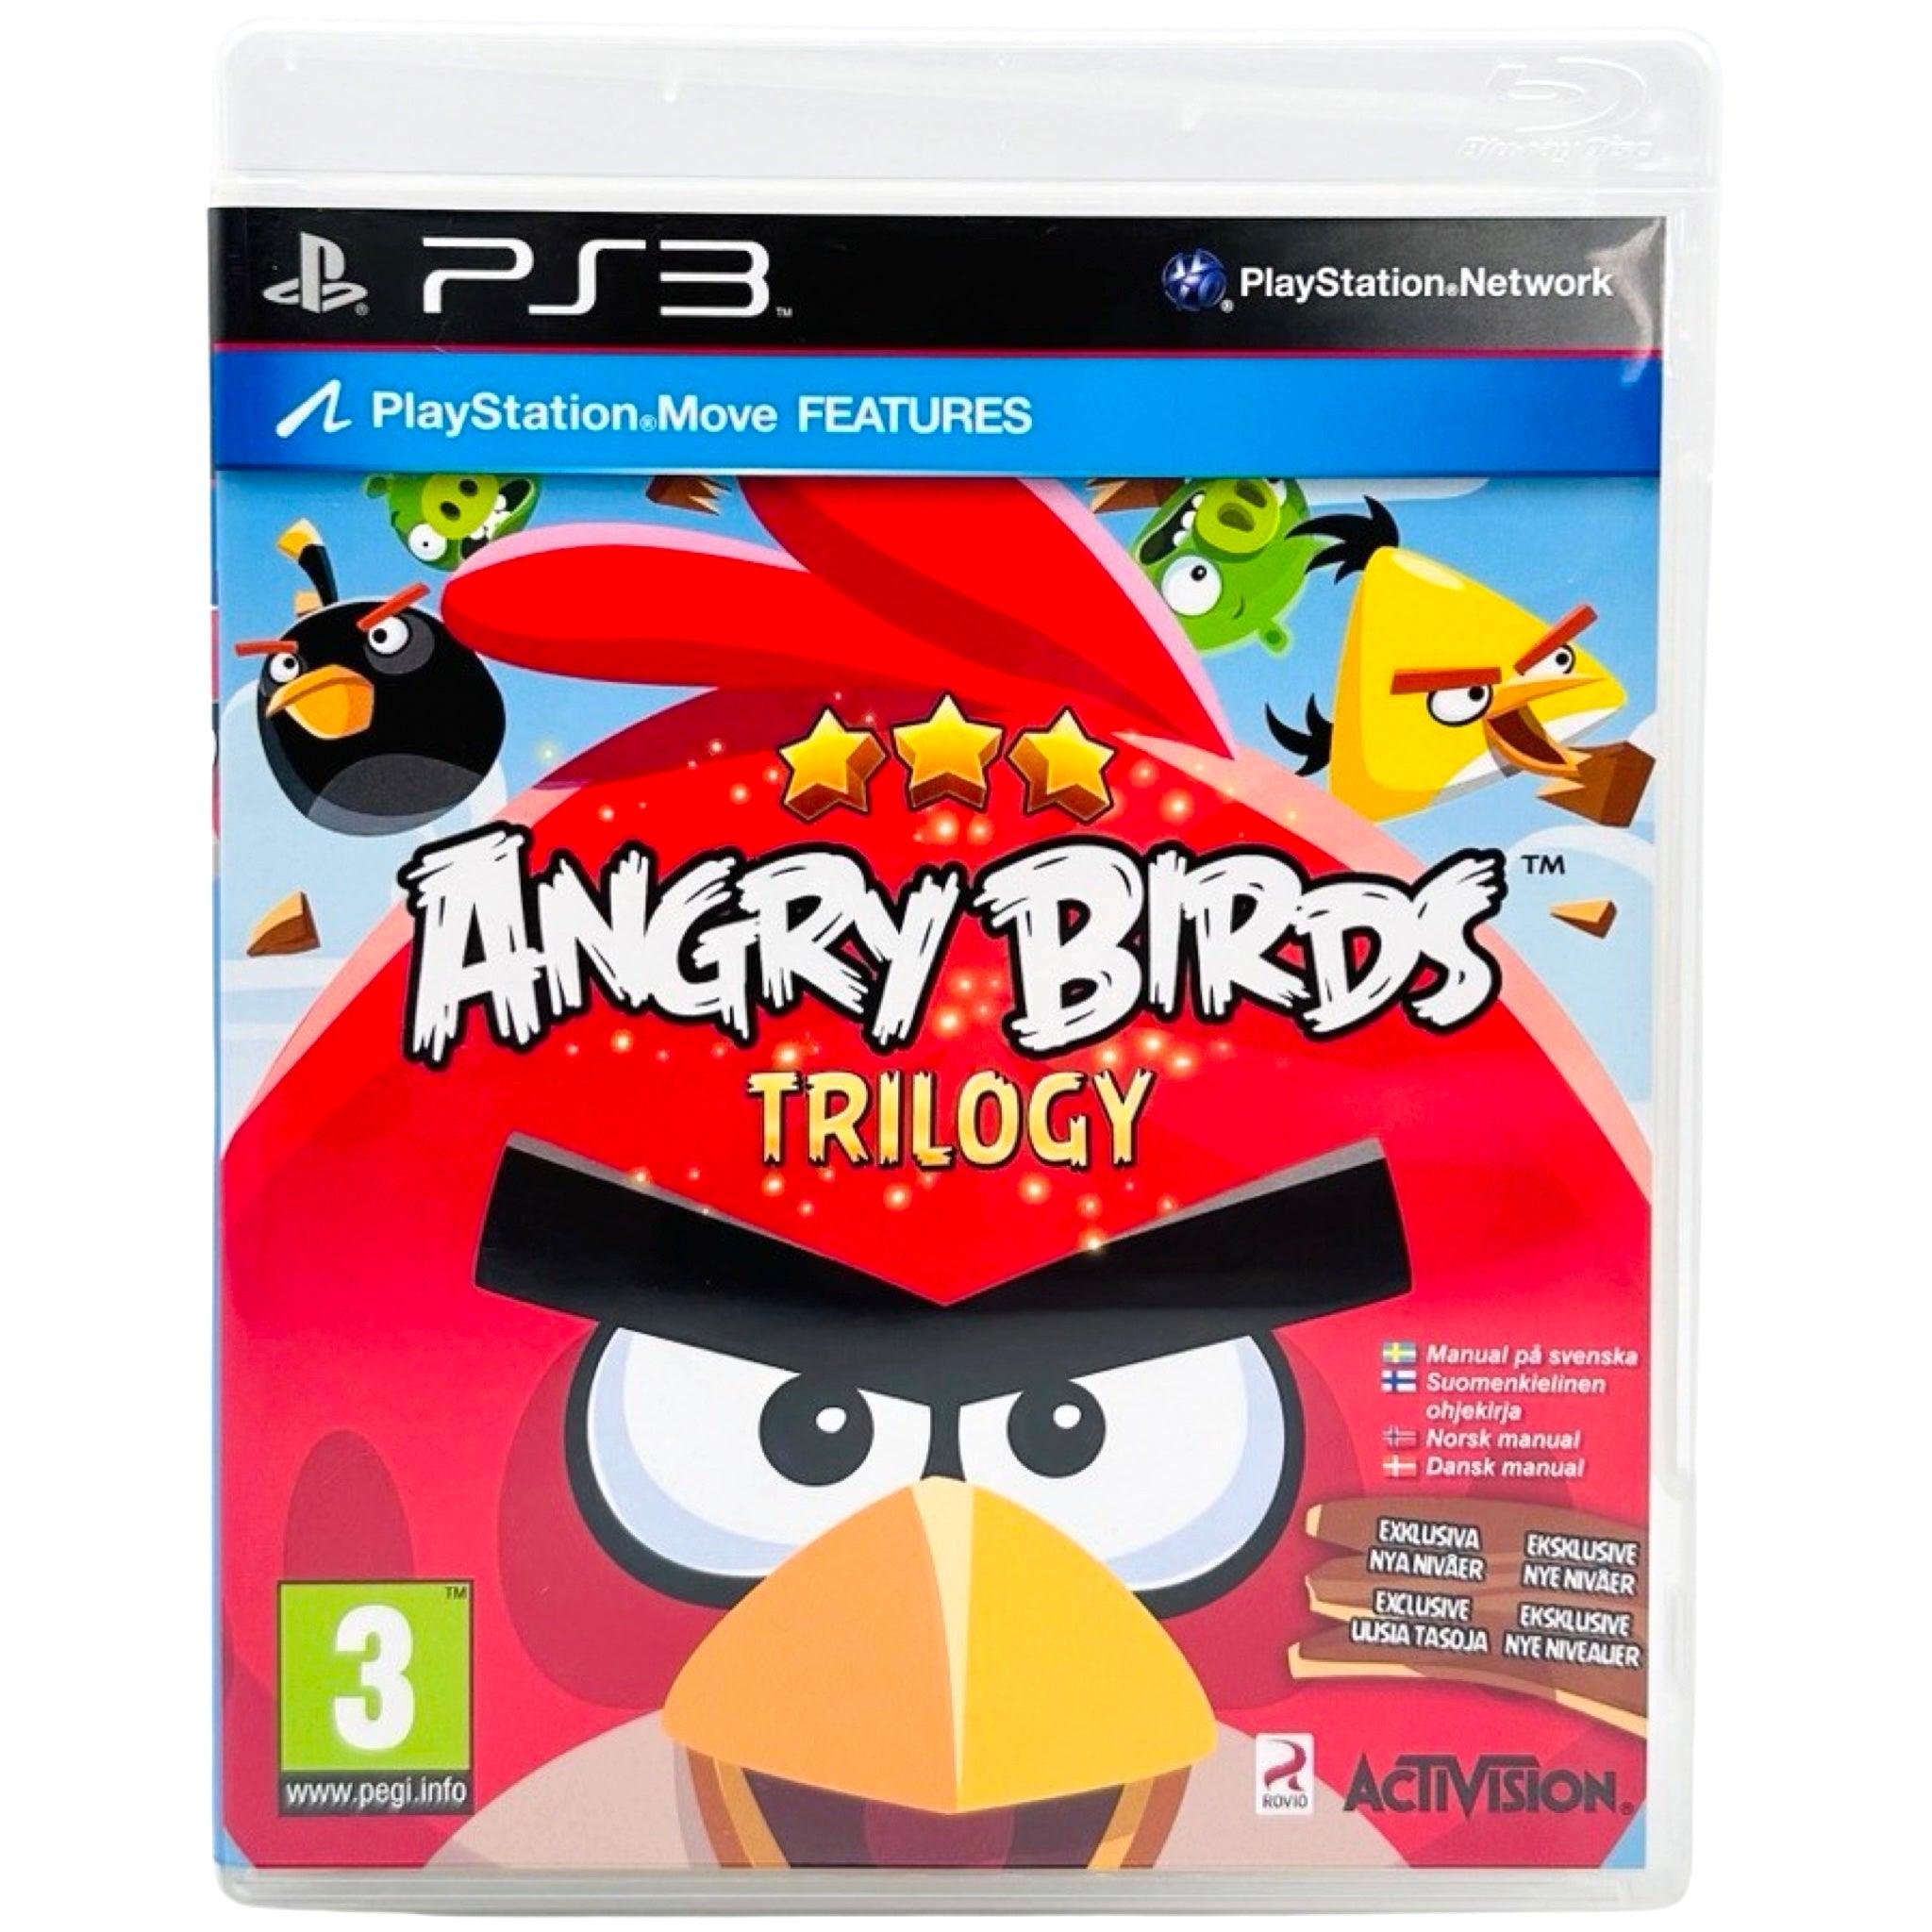 PS3: Angry Birds Trilogy - RetroGaming.no